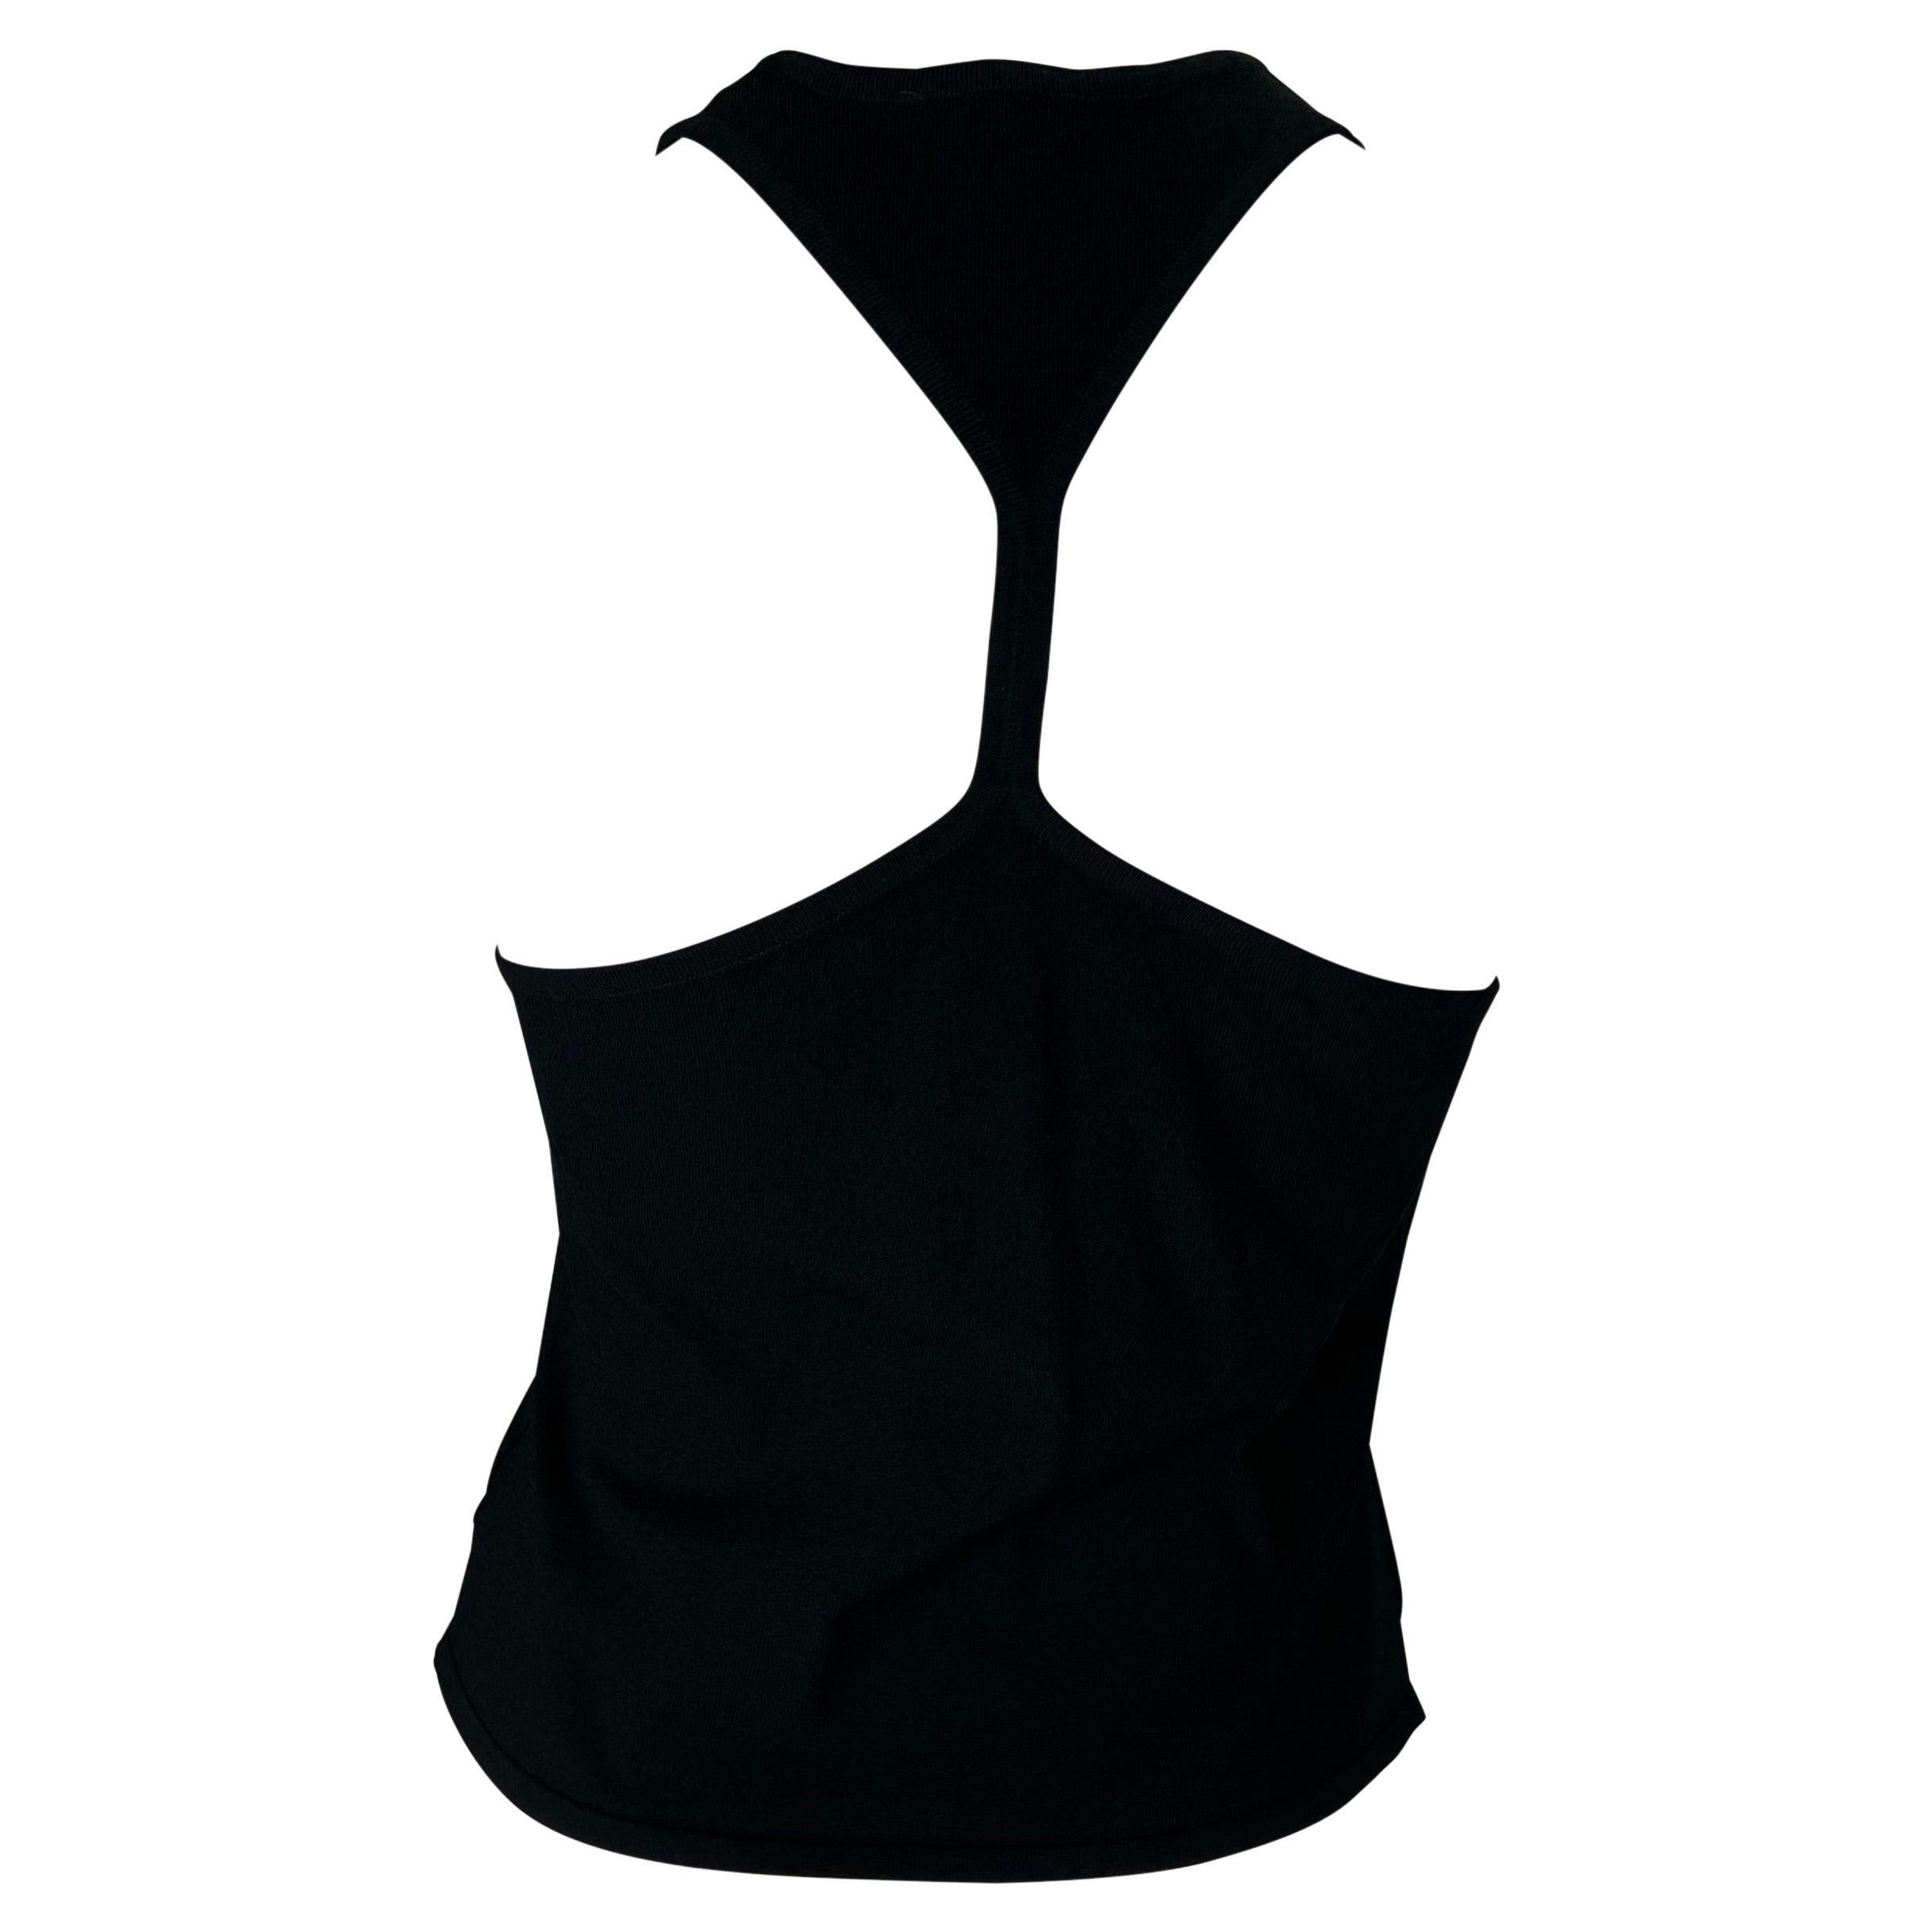 Presenting a sleek Tom Ford designed take on a Gucci racerback tank top. The fitted tank top features a high v-neck in the front and a tight racerback. This top was created by Tom Ford for the Spring/Summer 1998 collection and is the perfect chic